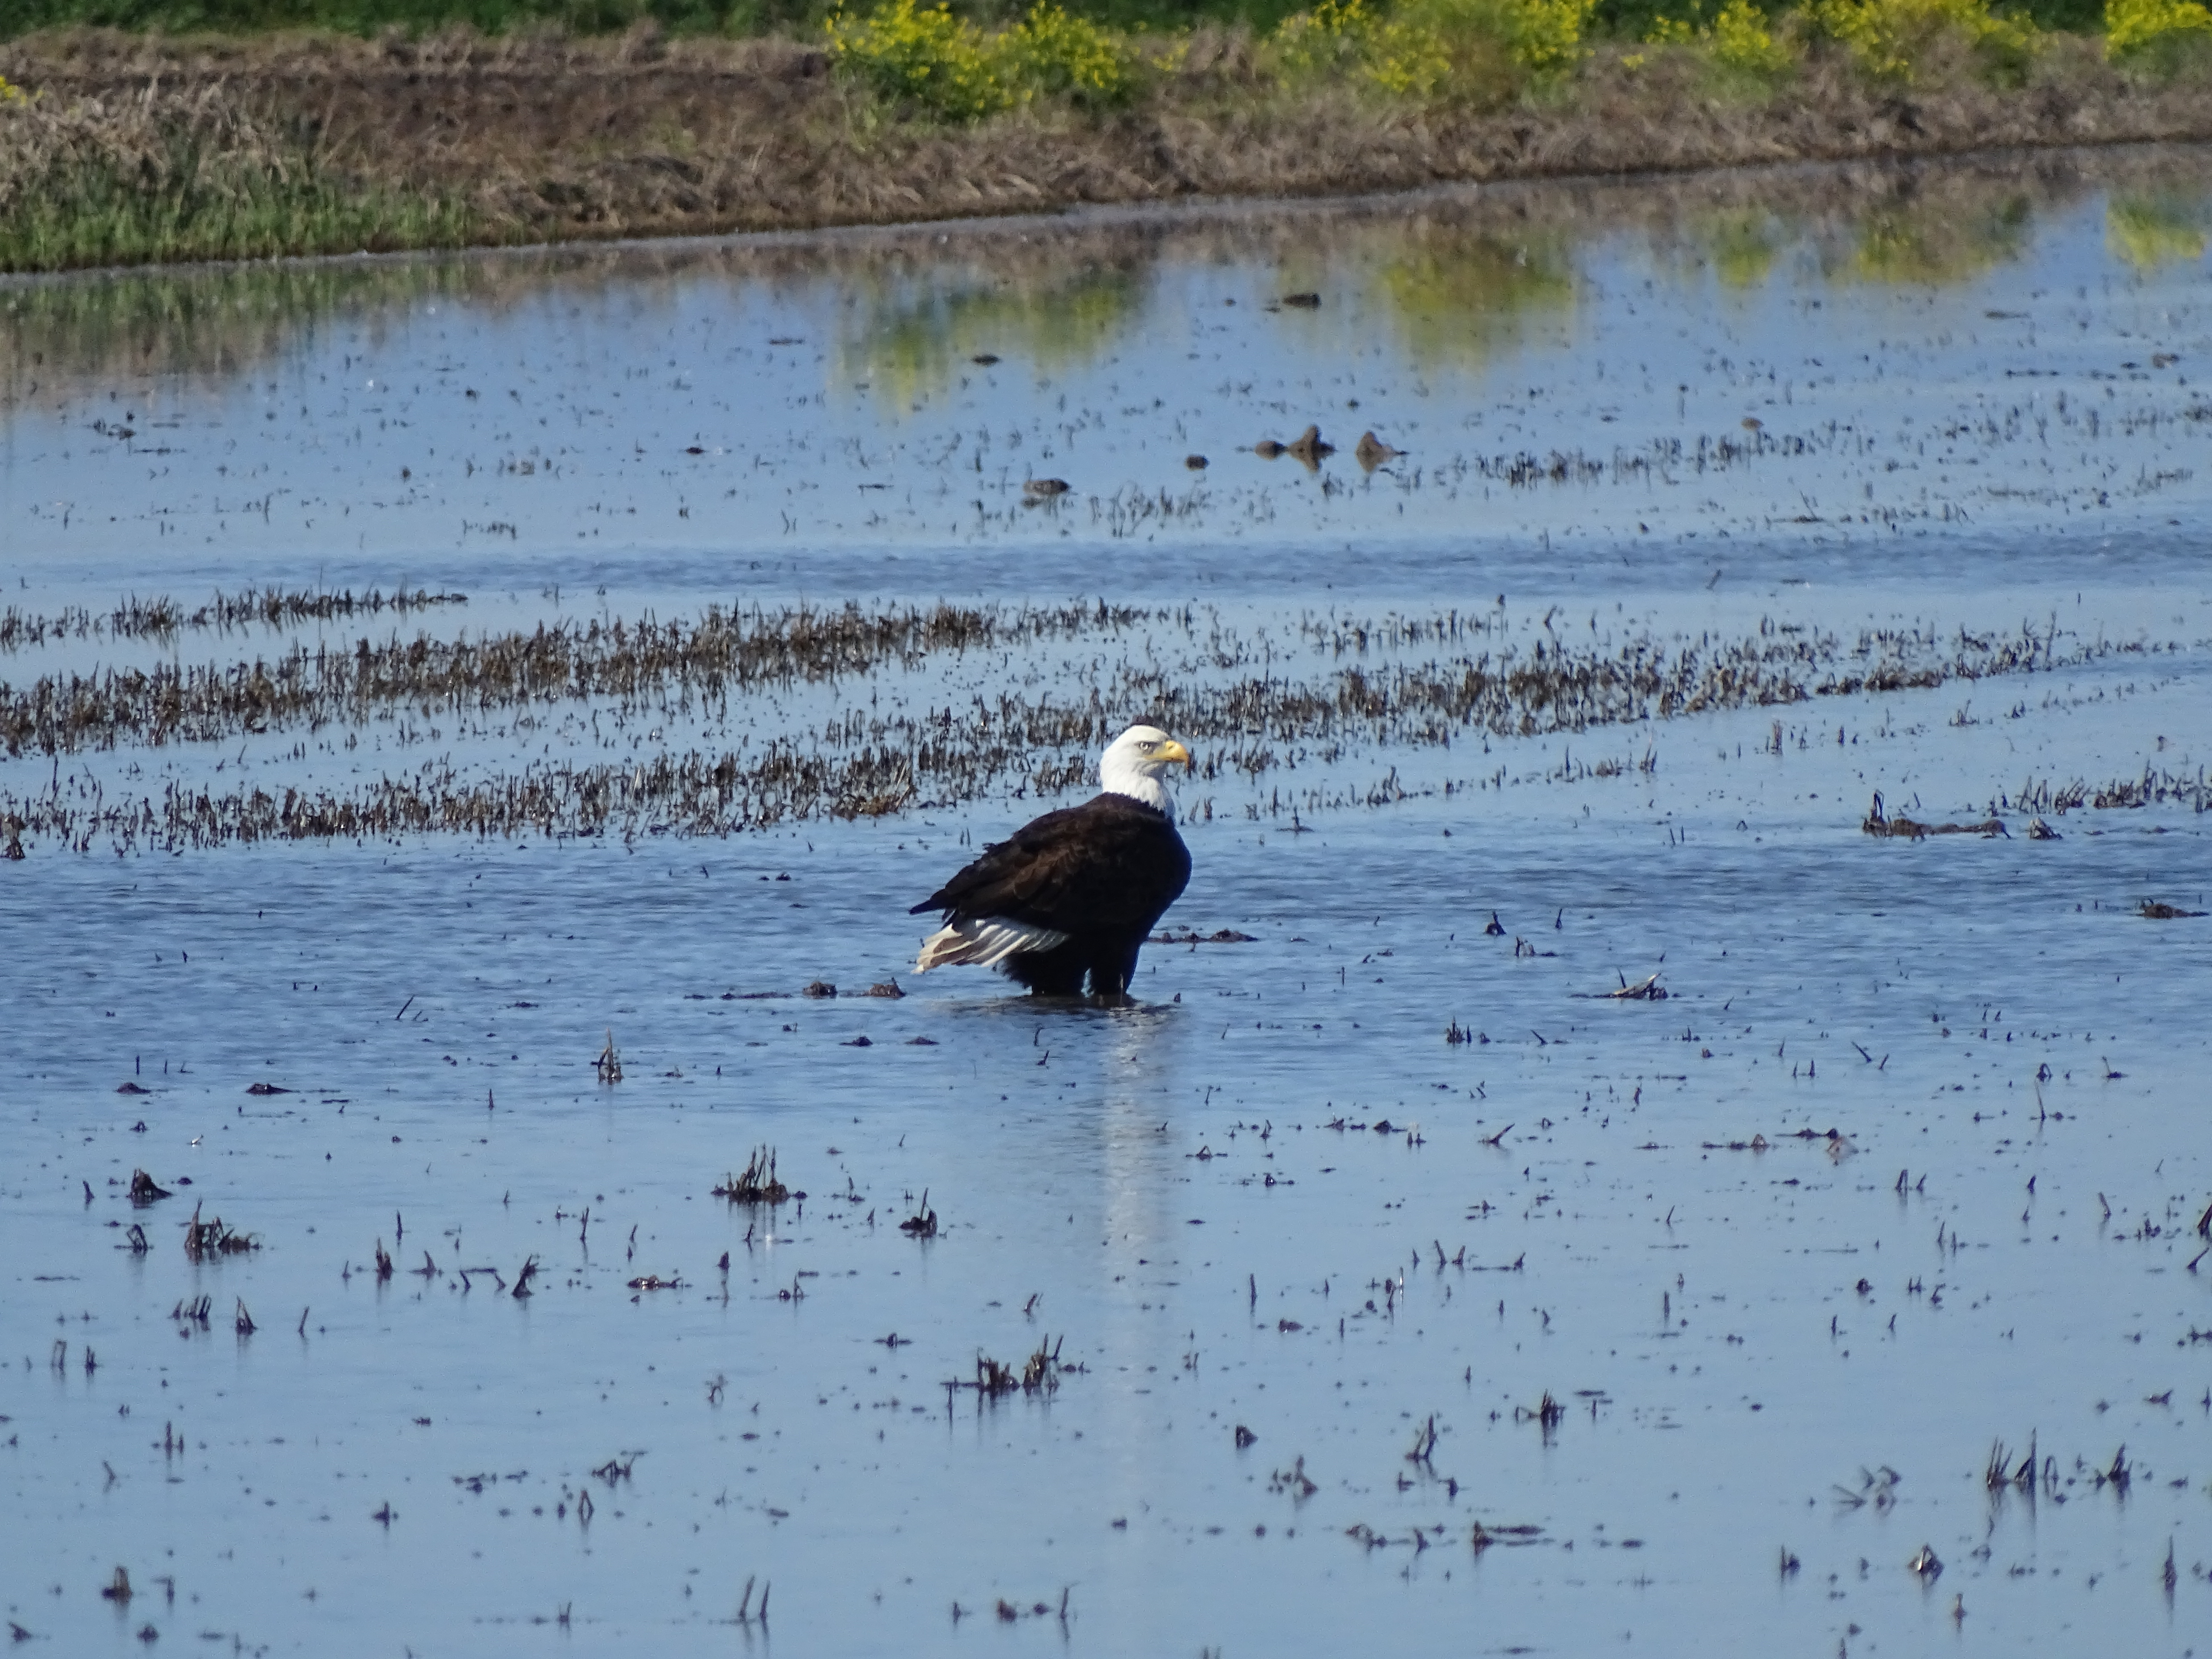 side profile view of a bald eagle standing in a shallow marsh area of the Preserve